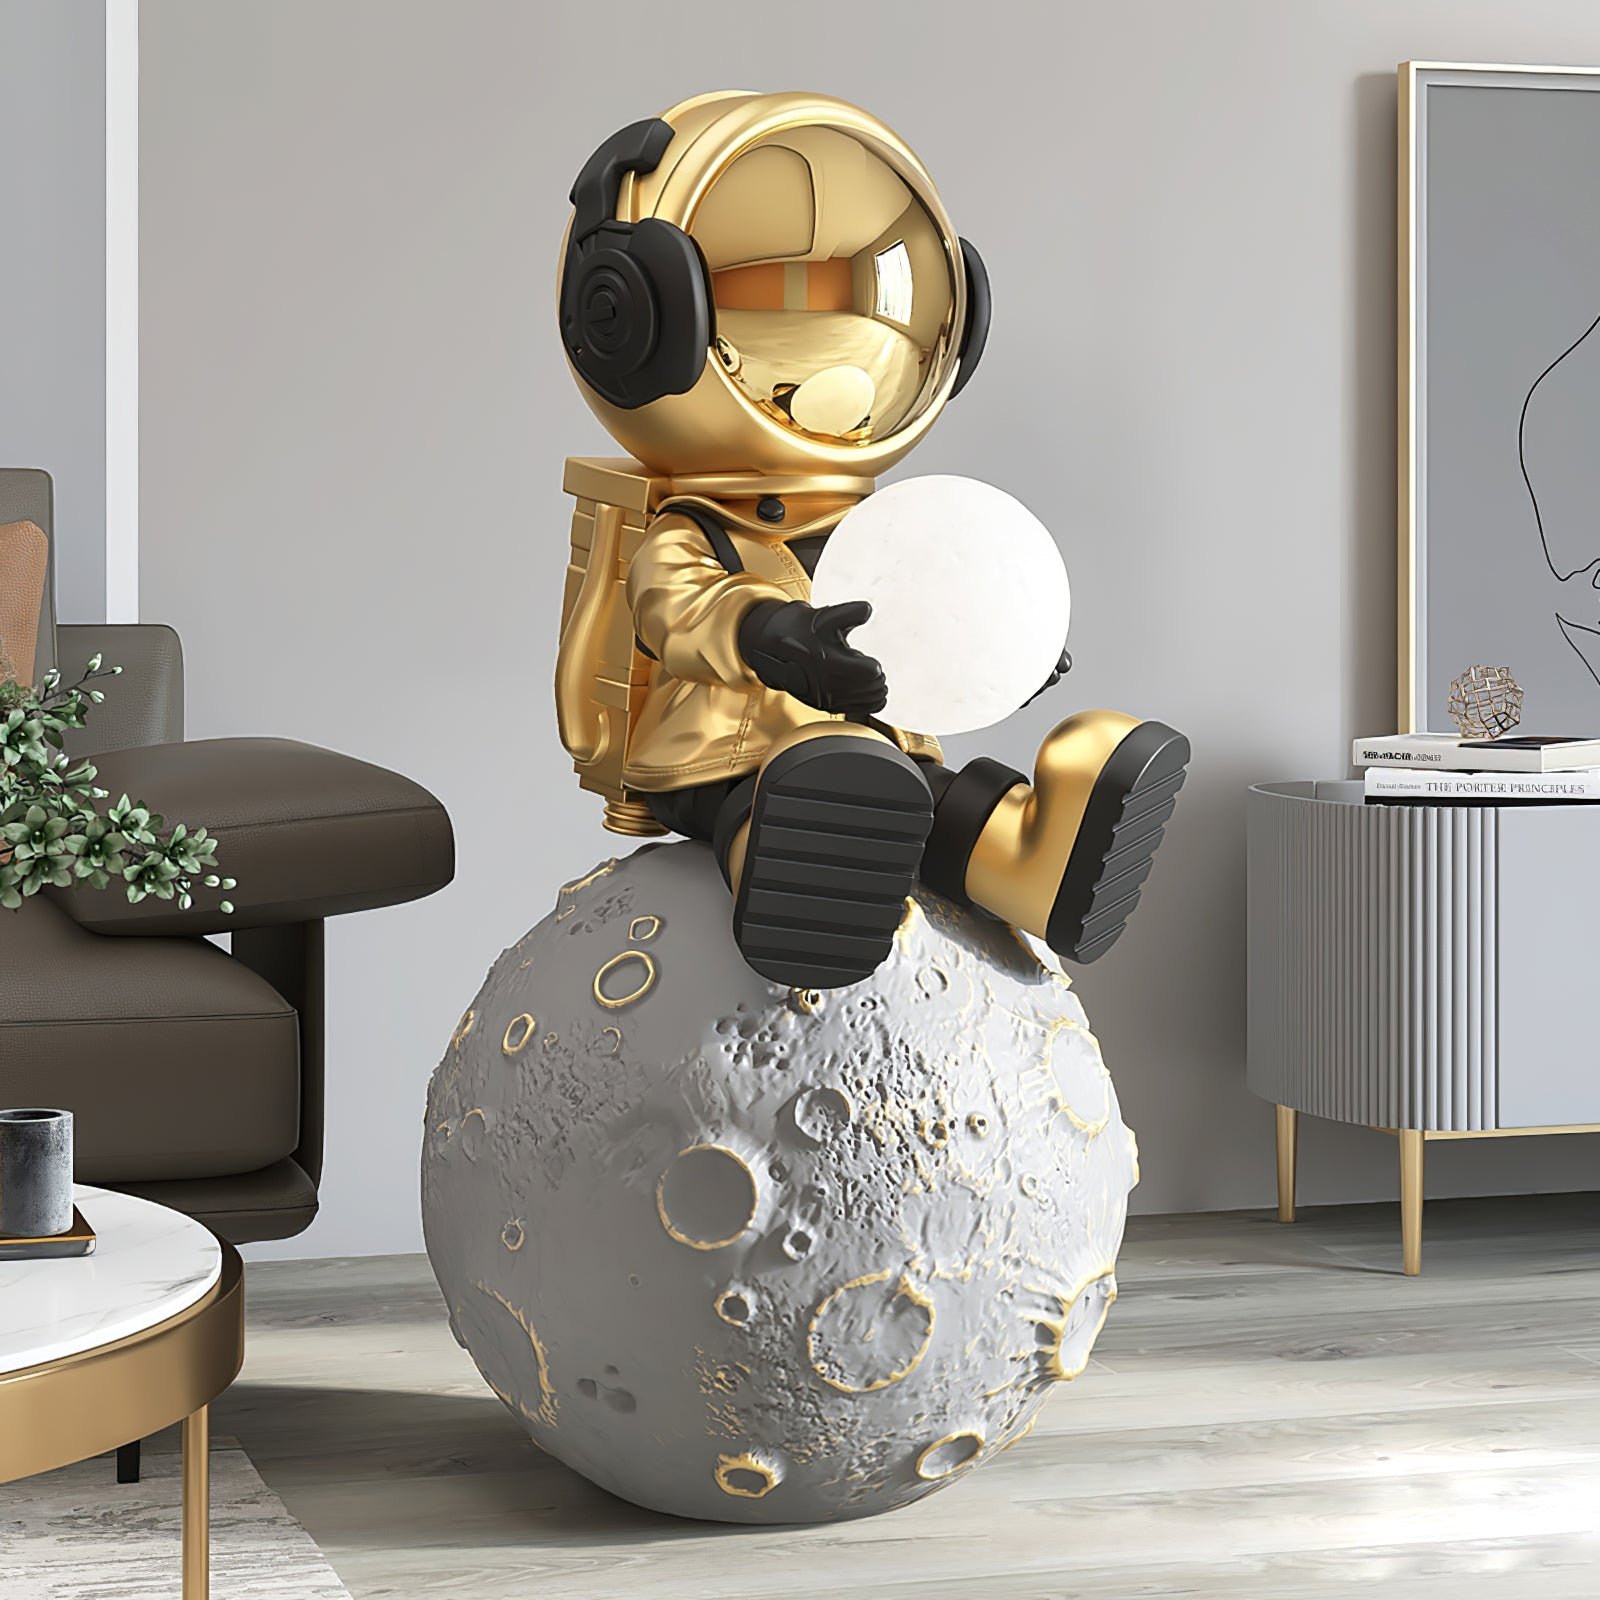 Floor Lamp Astronaut Design with Gold Finish, Diameter 19.6″ x Height 33.8″ (50cm x 86cm), Touch Control